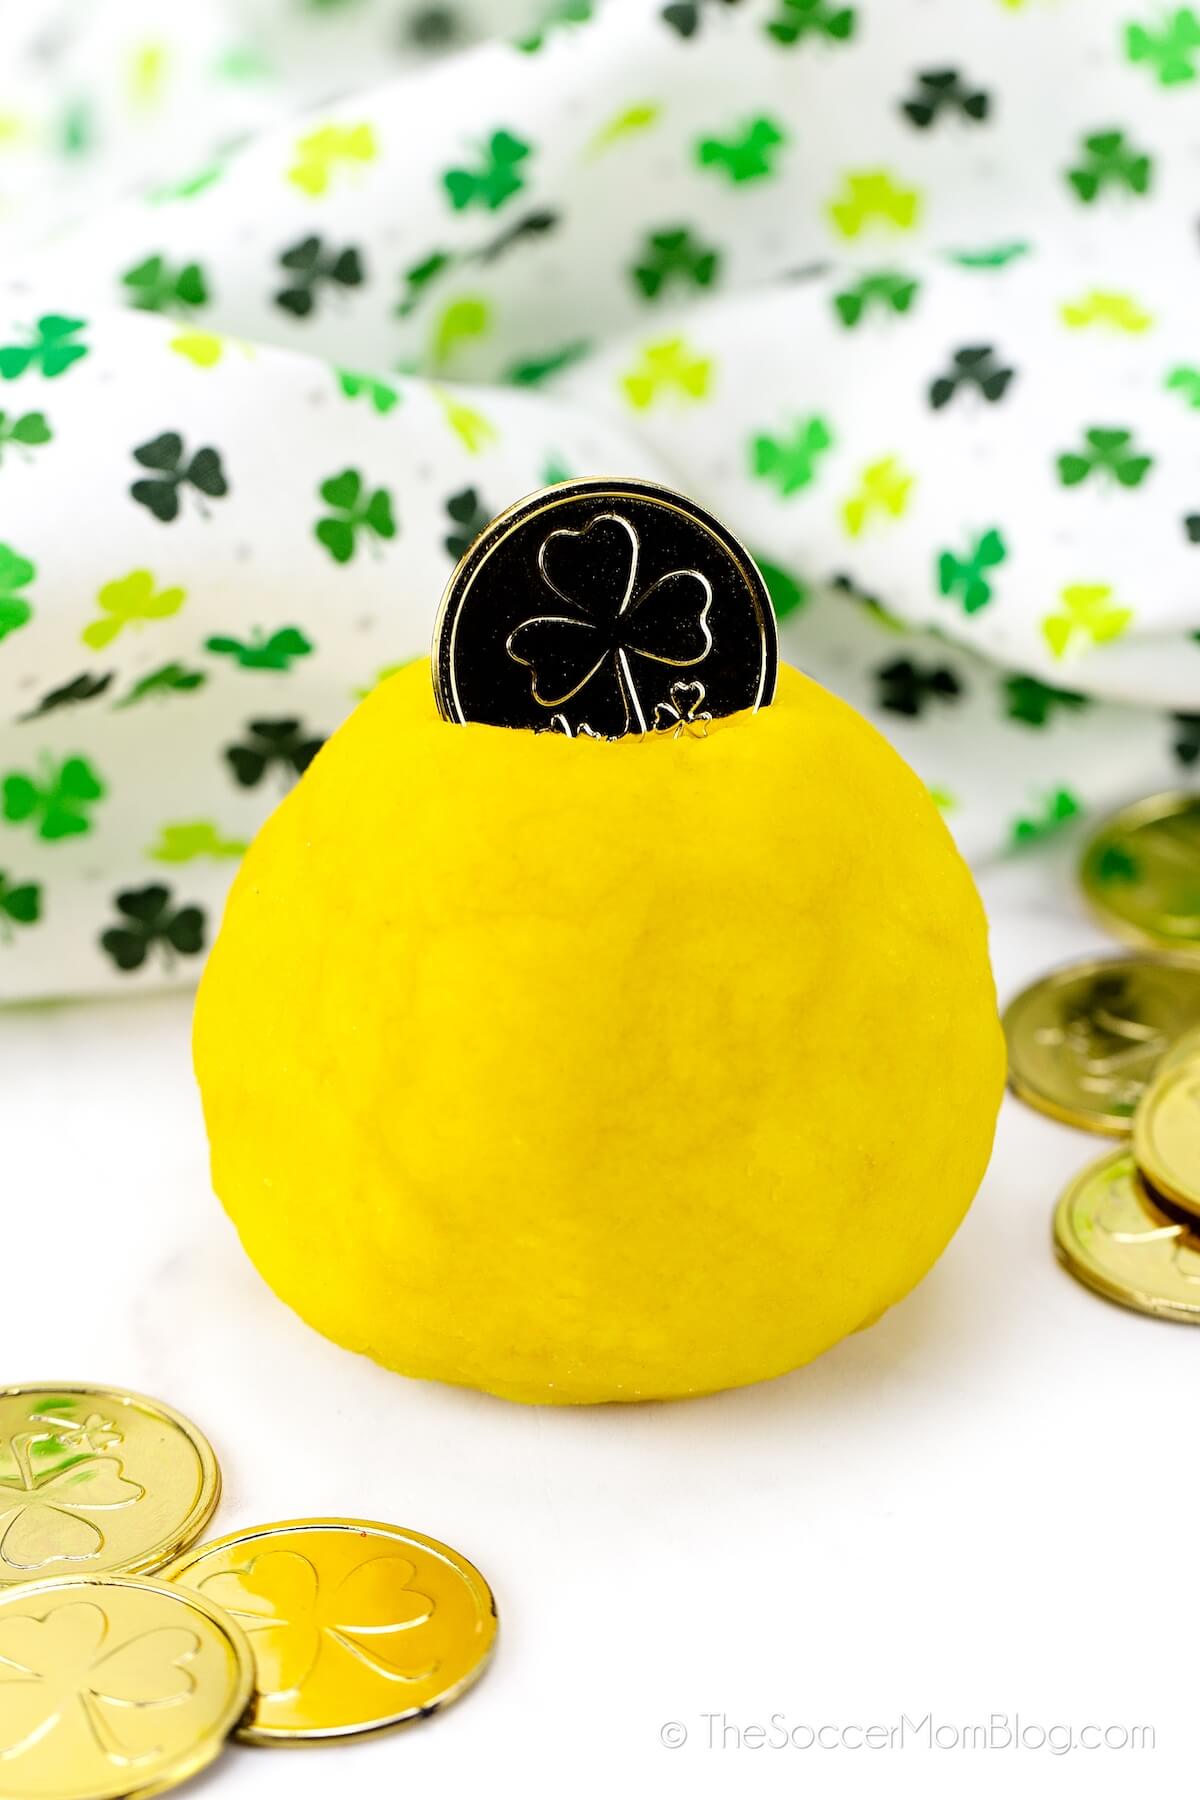 ball of yellow playdough with a gold coin on top